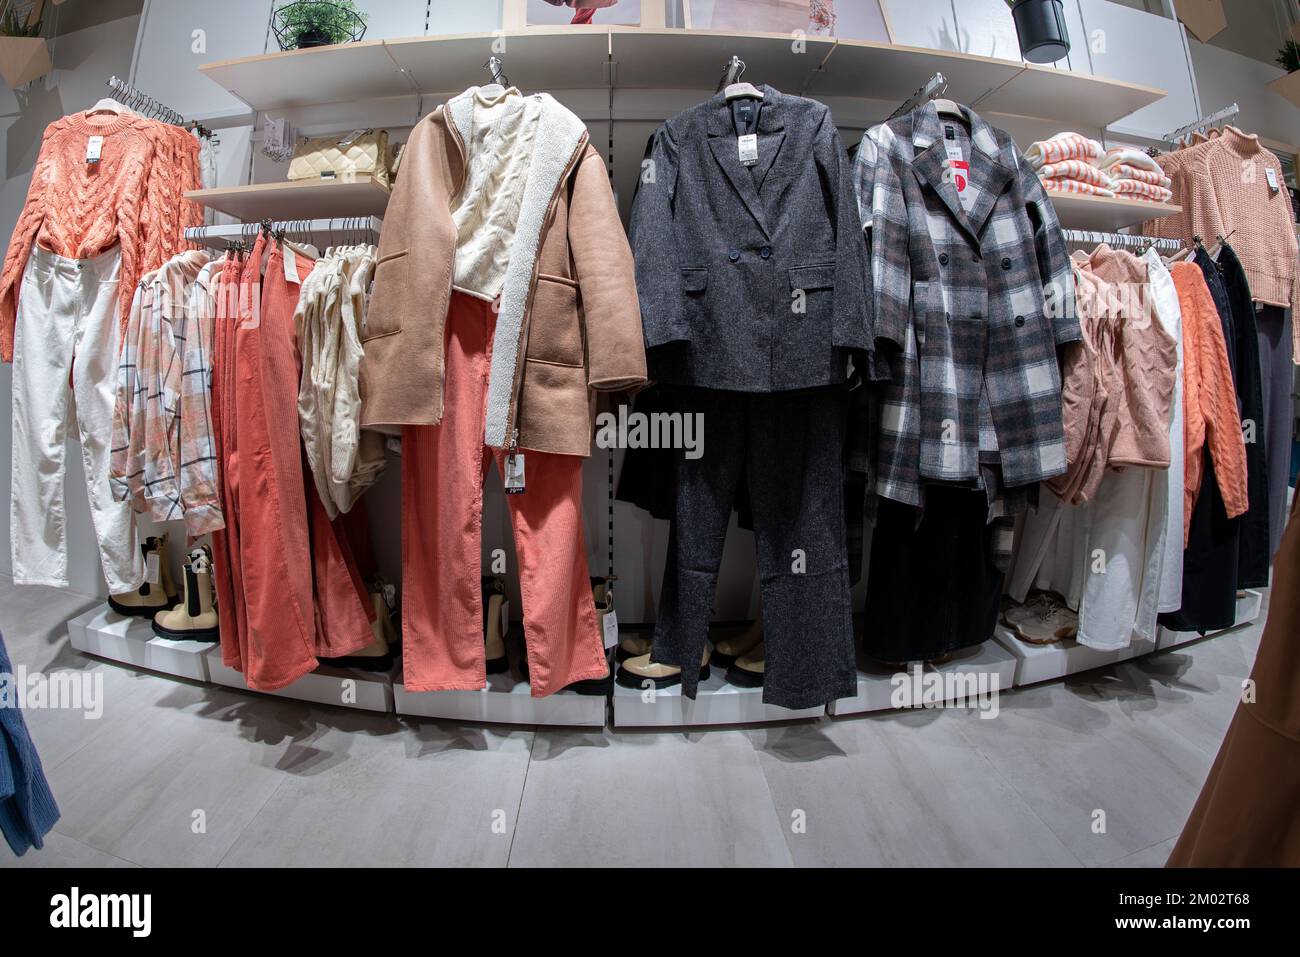 Bra, Cuneo, Italy - November 30, 2022: women's winter clothing exhibited  for sale in Calliope Store in italian shopping mall, Calliope is an italian  f Stock Photo - Alamy